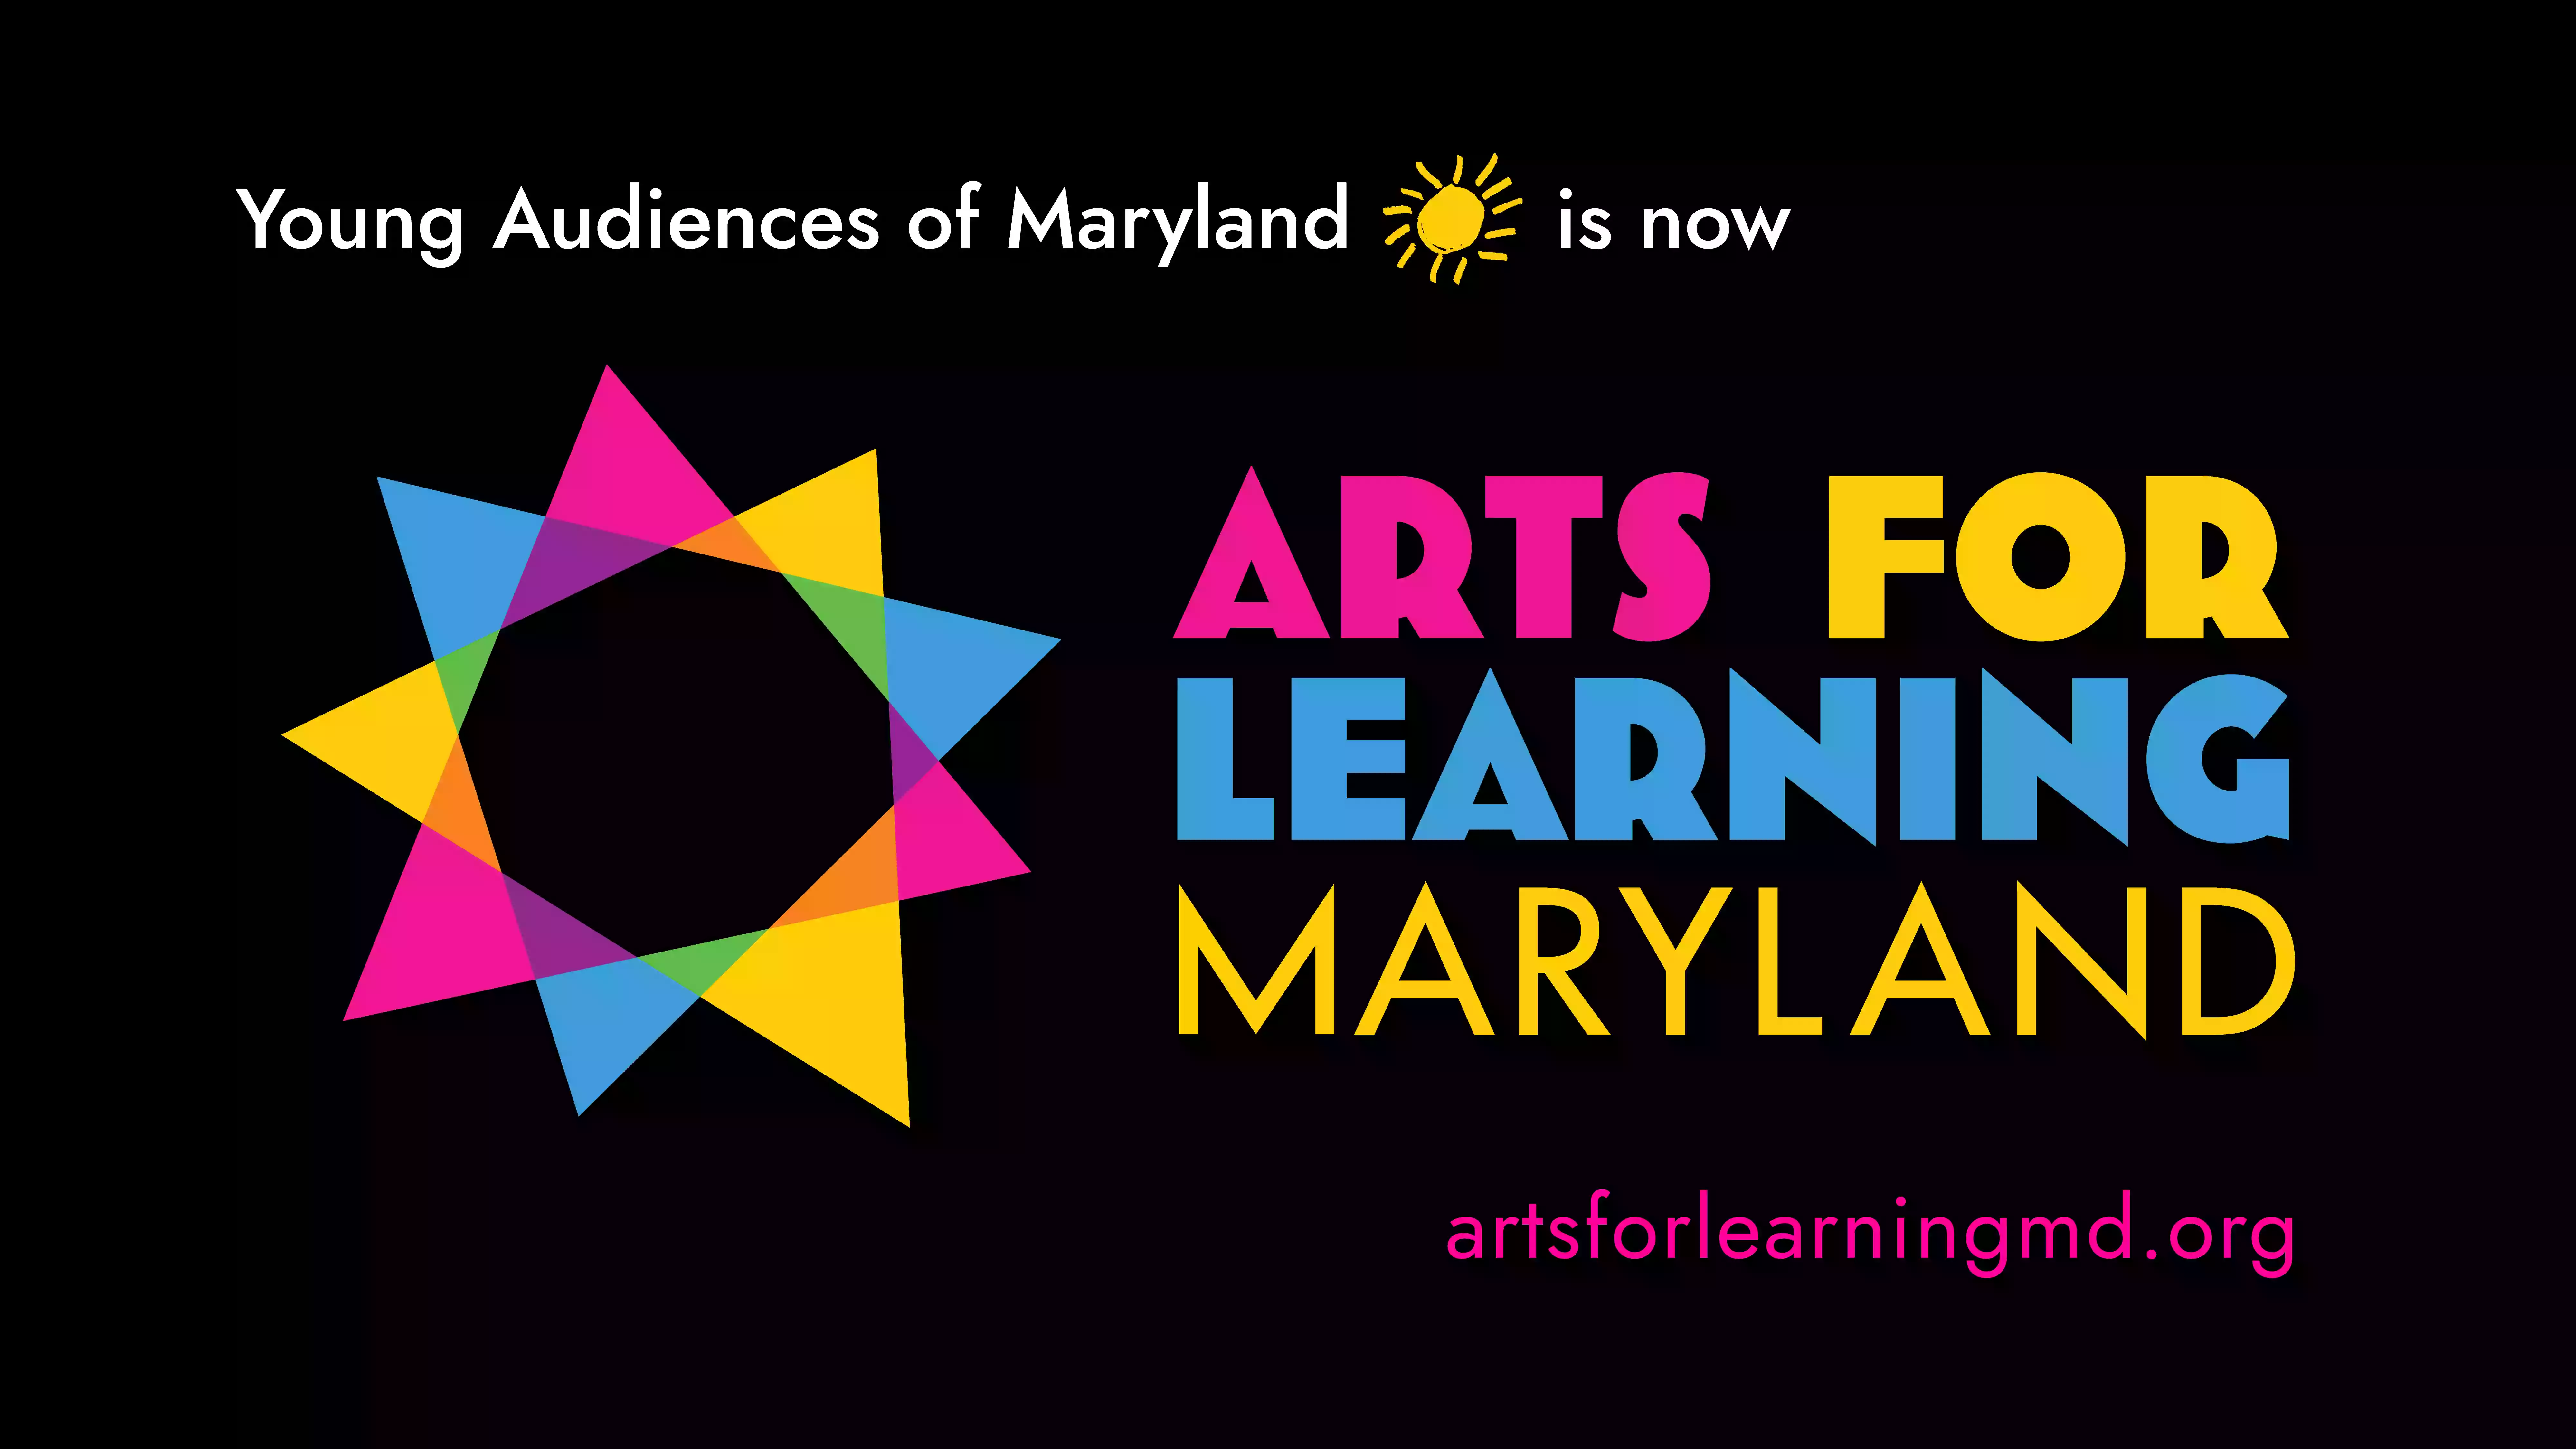 Arts for Learning Maryland